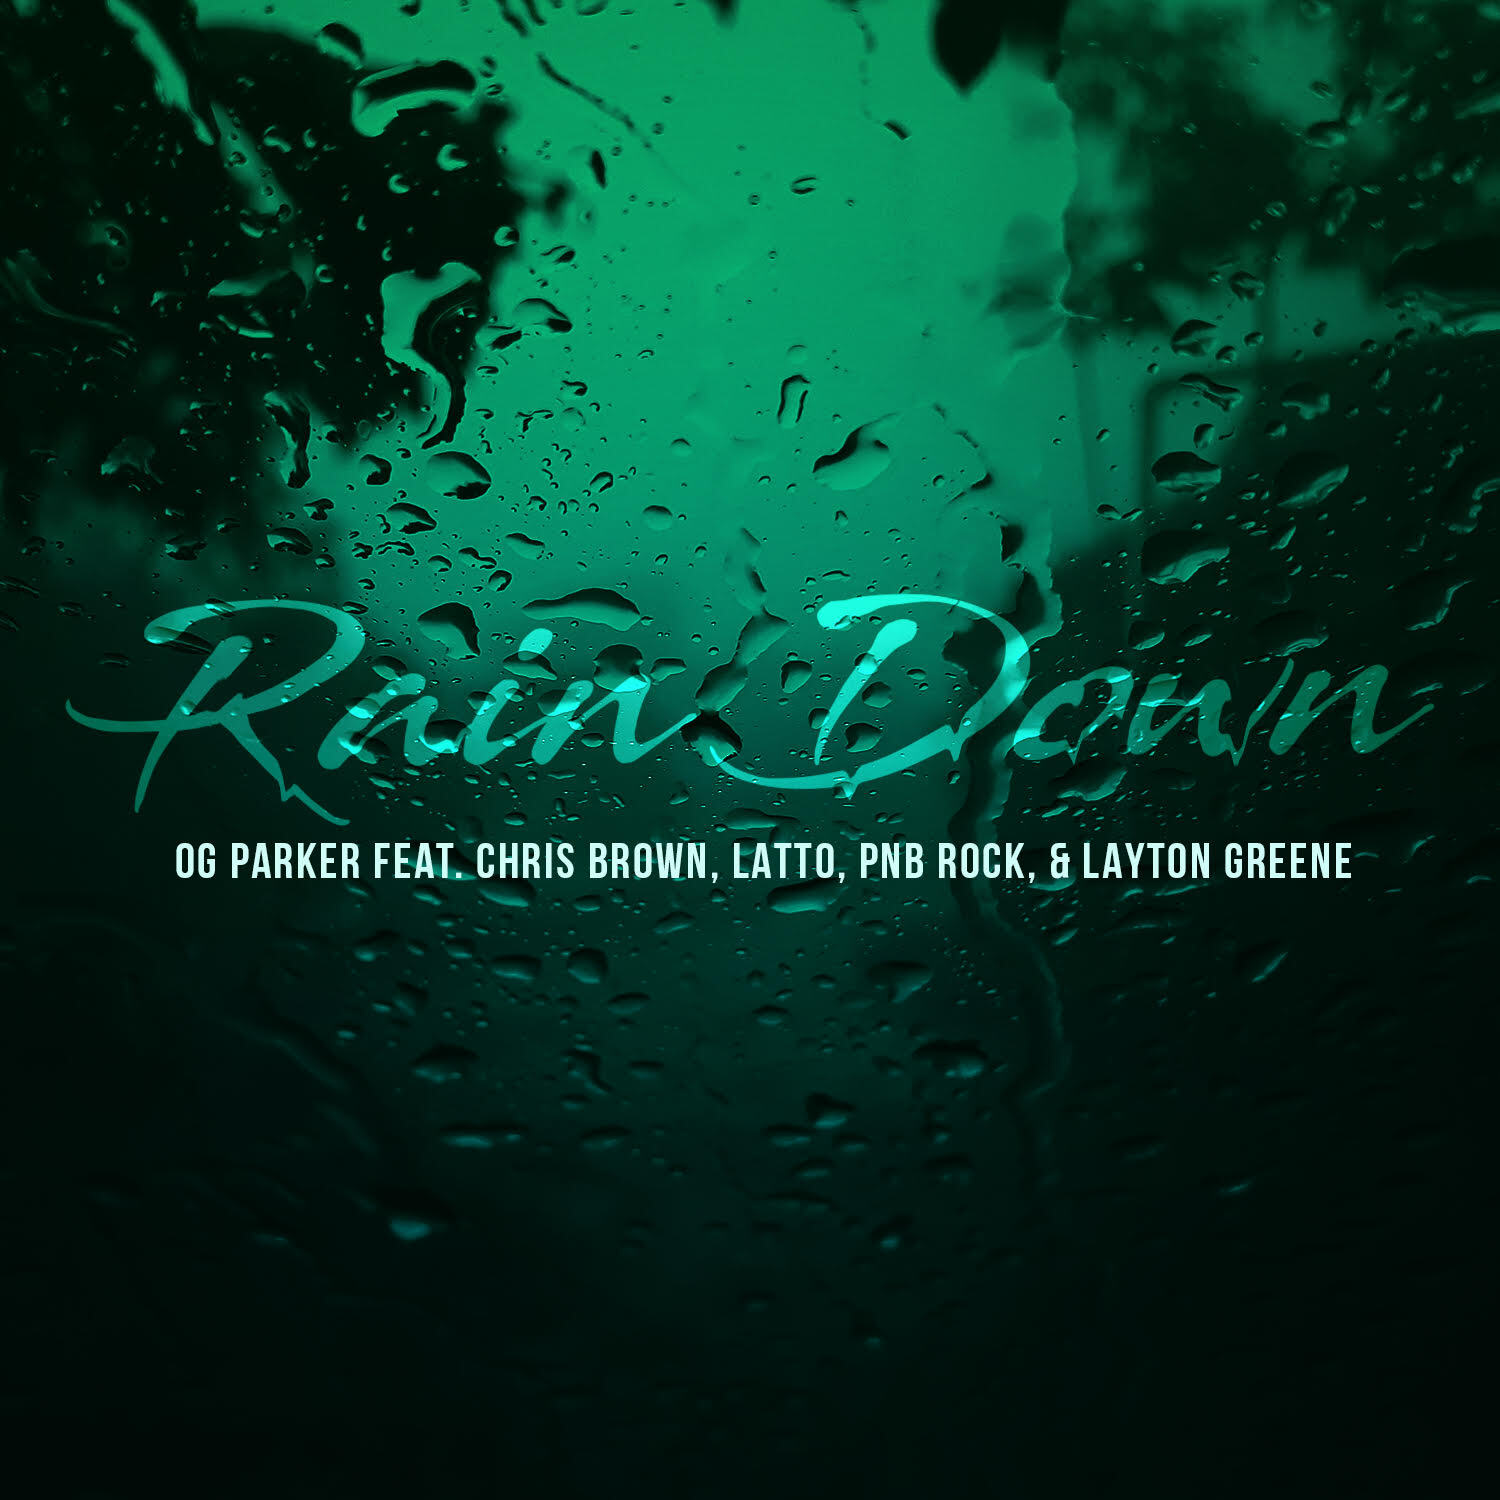 Art for Rain Down (Dirty) by OG Parker ft Chris Brown, Latto & PnB Rock